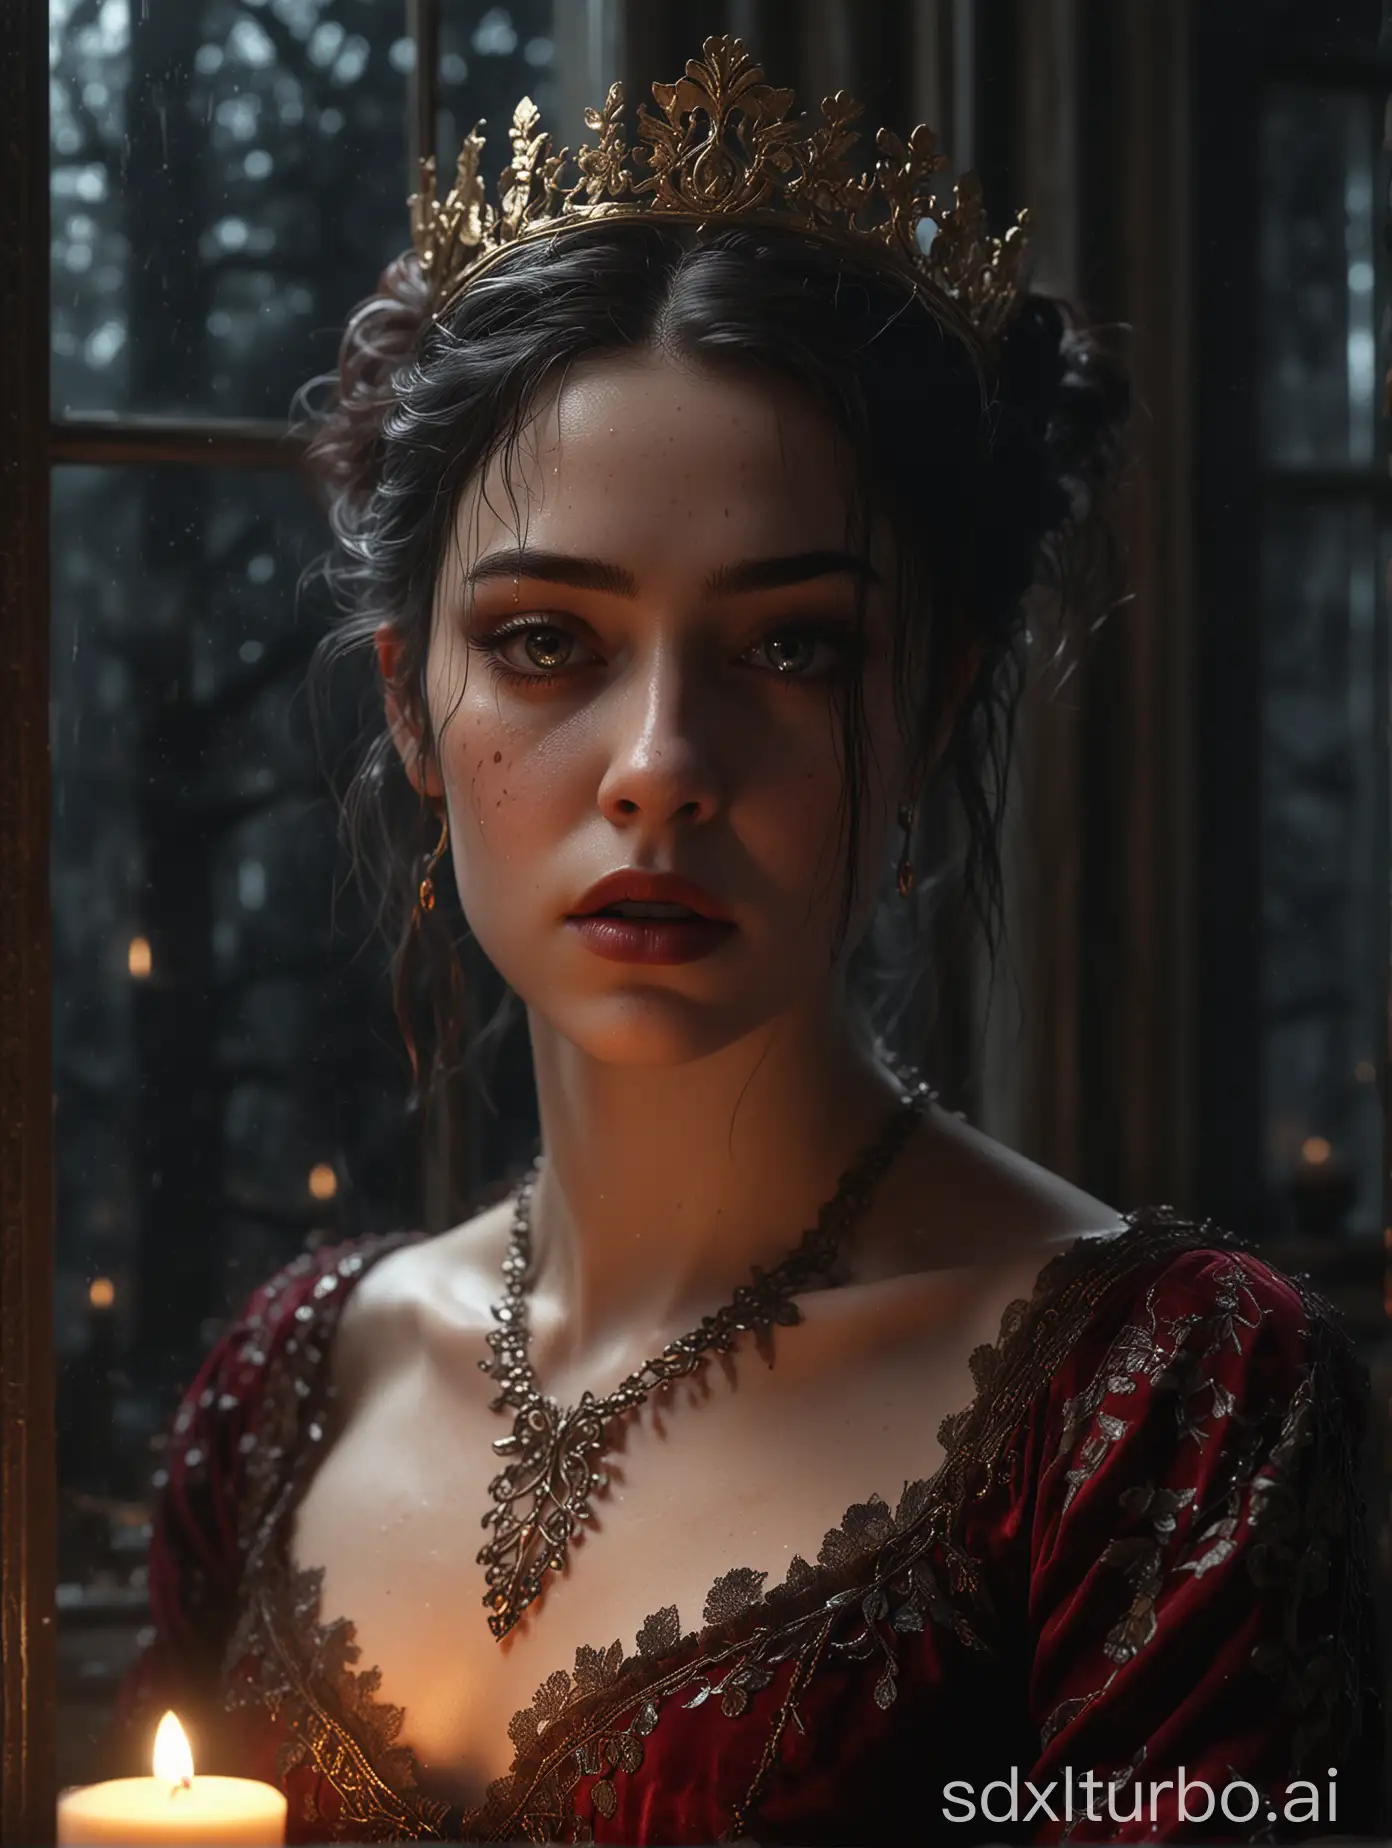 Dramatic-Portrait-of-a-Fallen-Gilded-Queen-in-Burgundy-Velvet-and-Lace-Dress-by-Candlelight